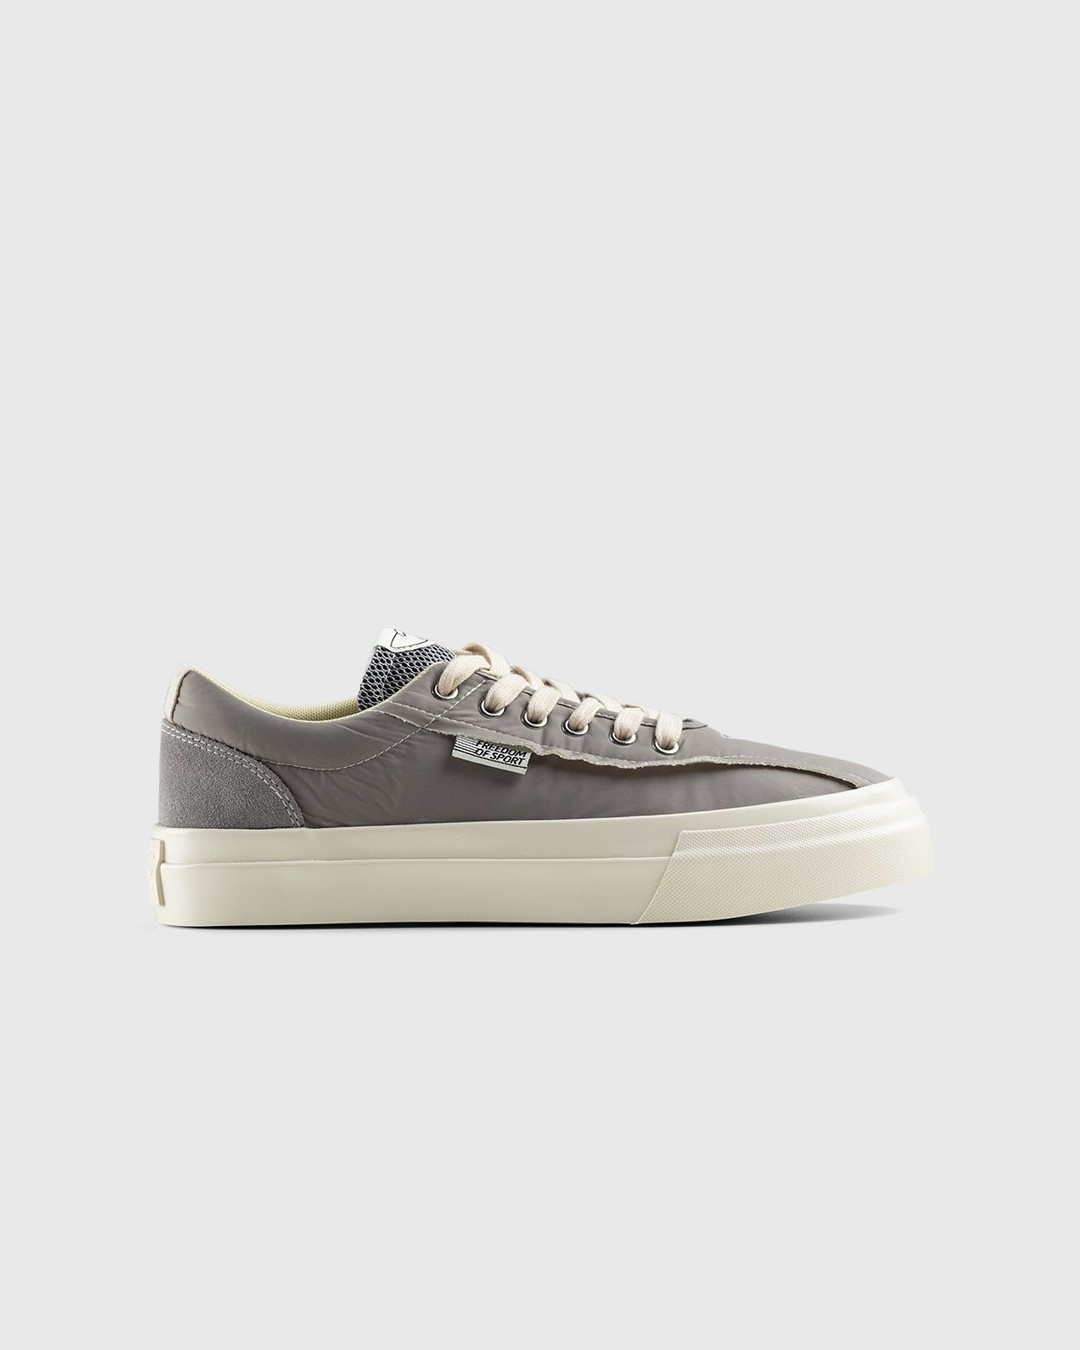 Stepney Workers Club – Dellow Track Raw Nylon Grey - Low Top Sneakers - Grey - Image 1